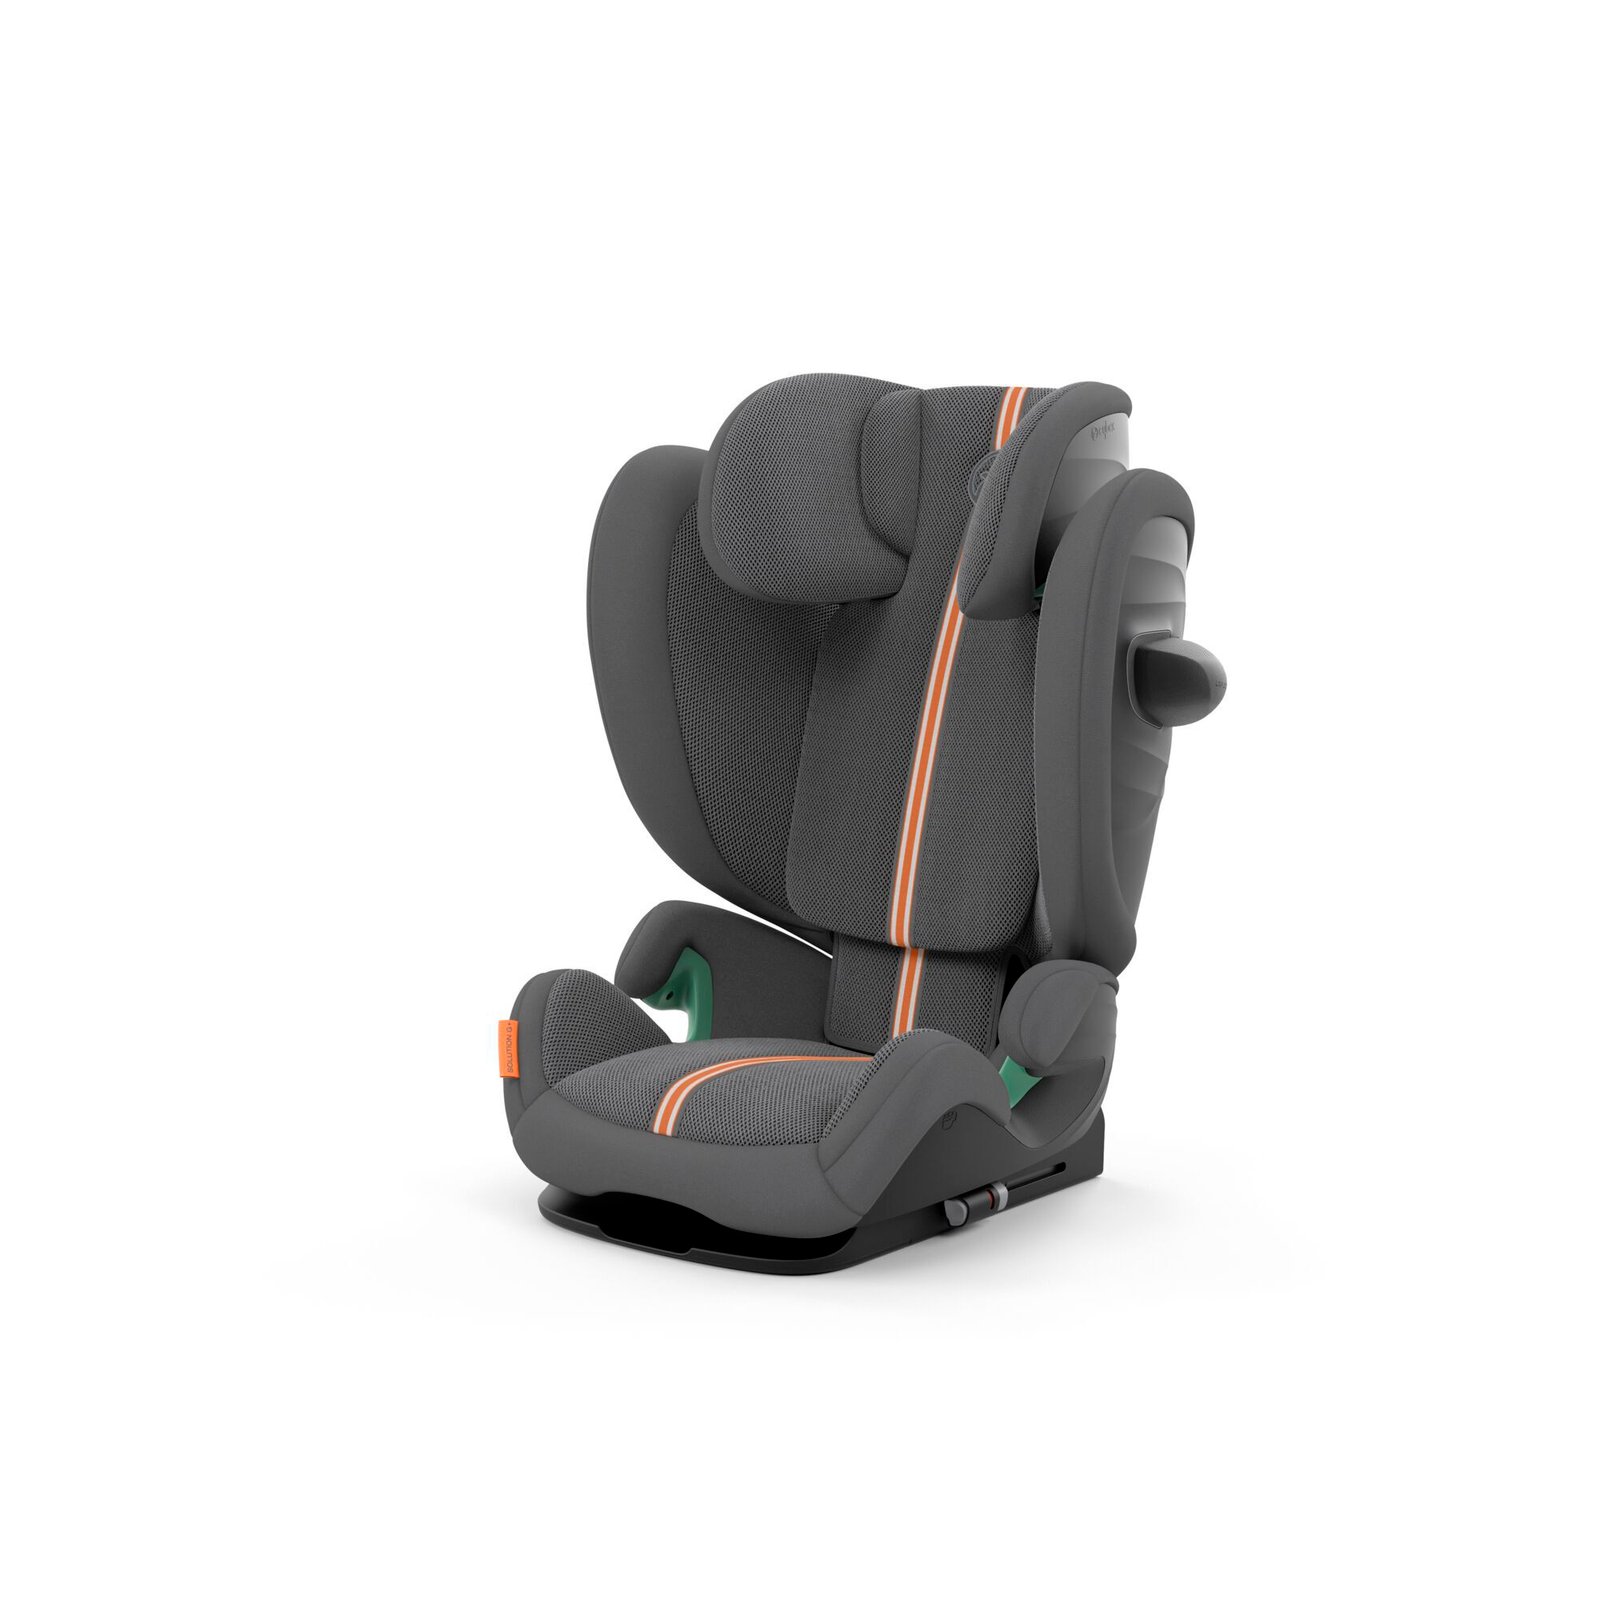 Joie spin 360™ GTi i-Size Spinning car seat for birth to 4  years-Cobblestone - Little'Uns Retail Ltd